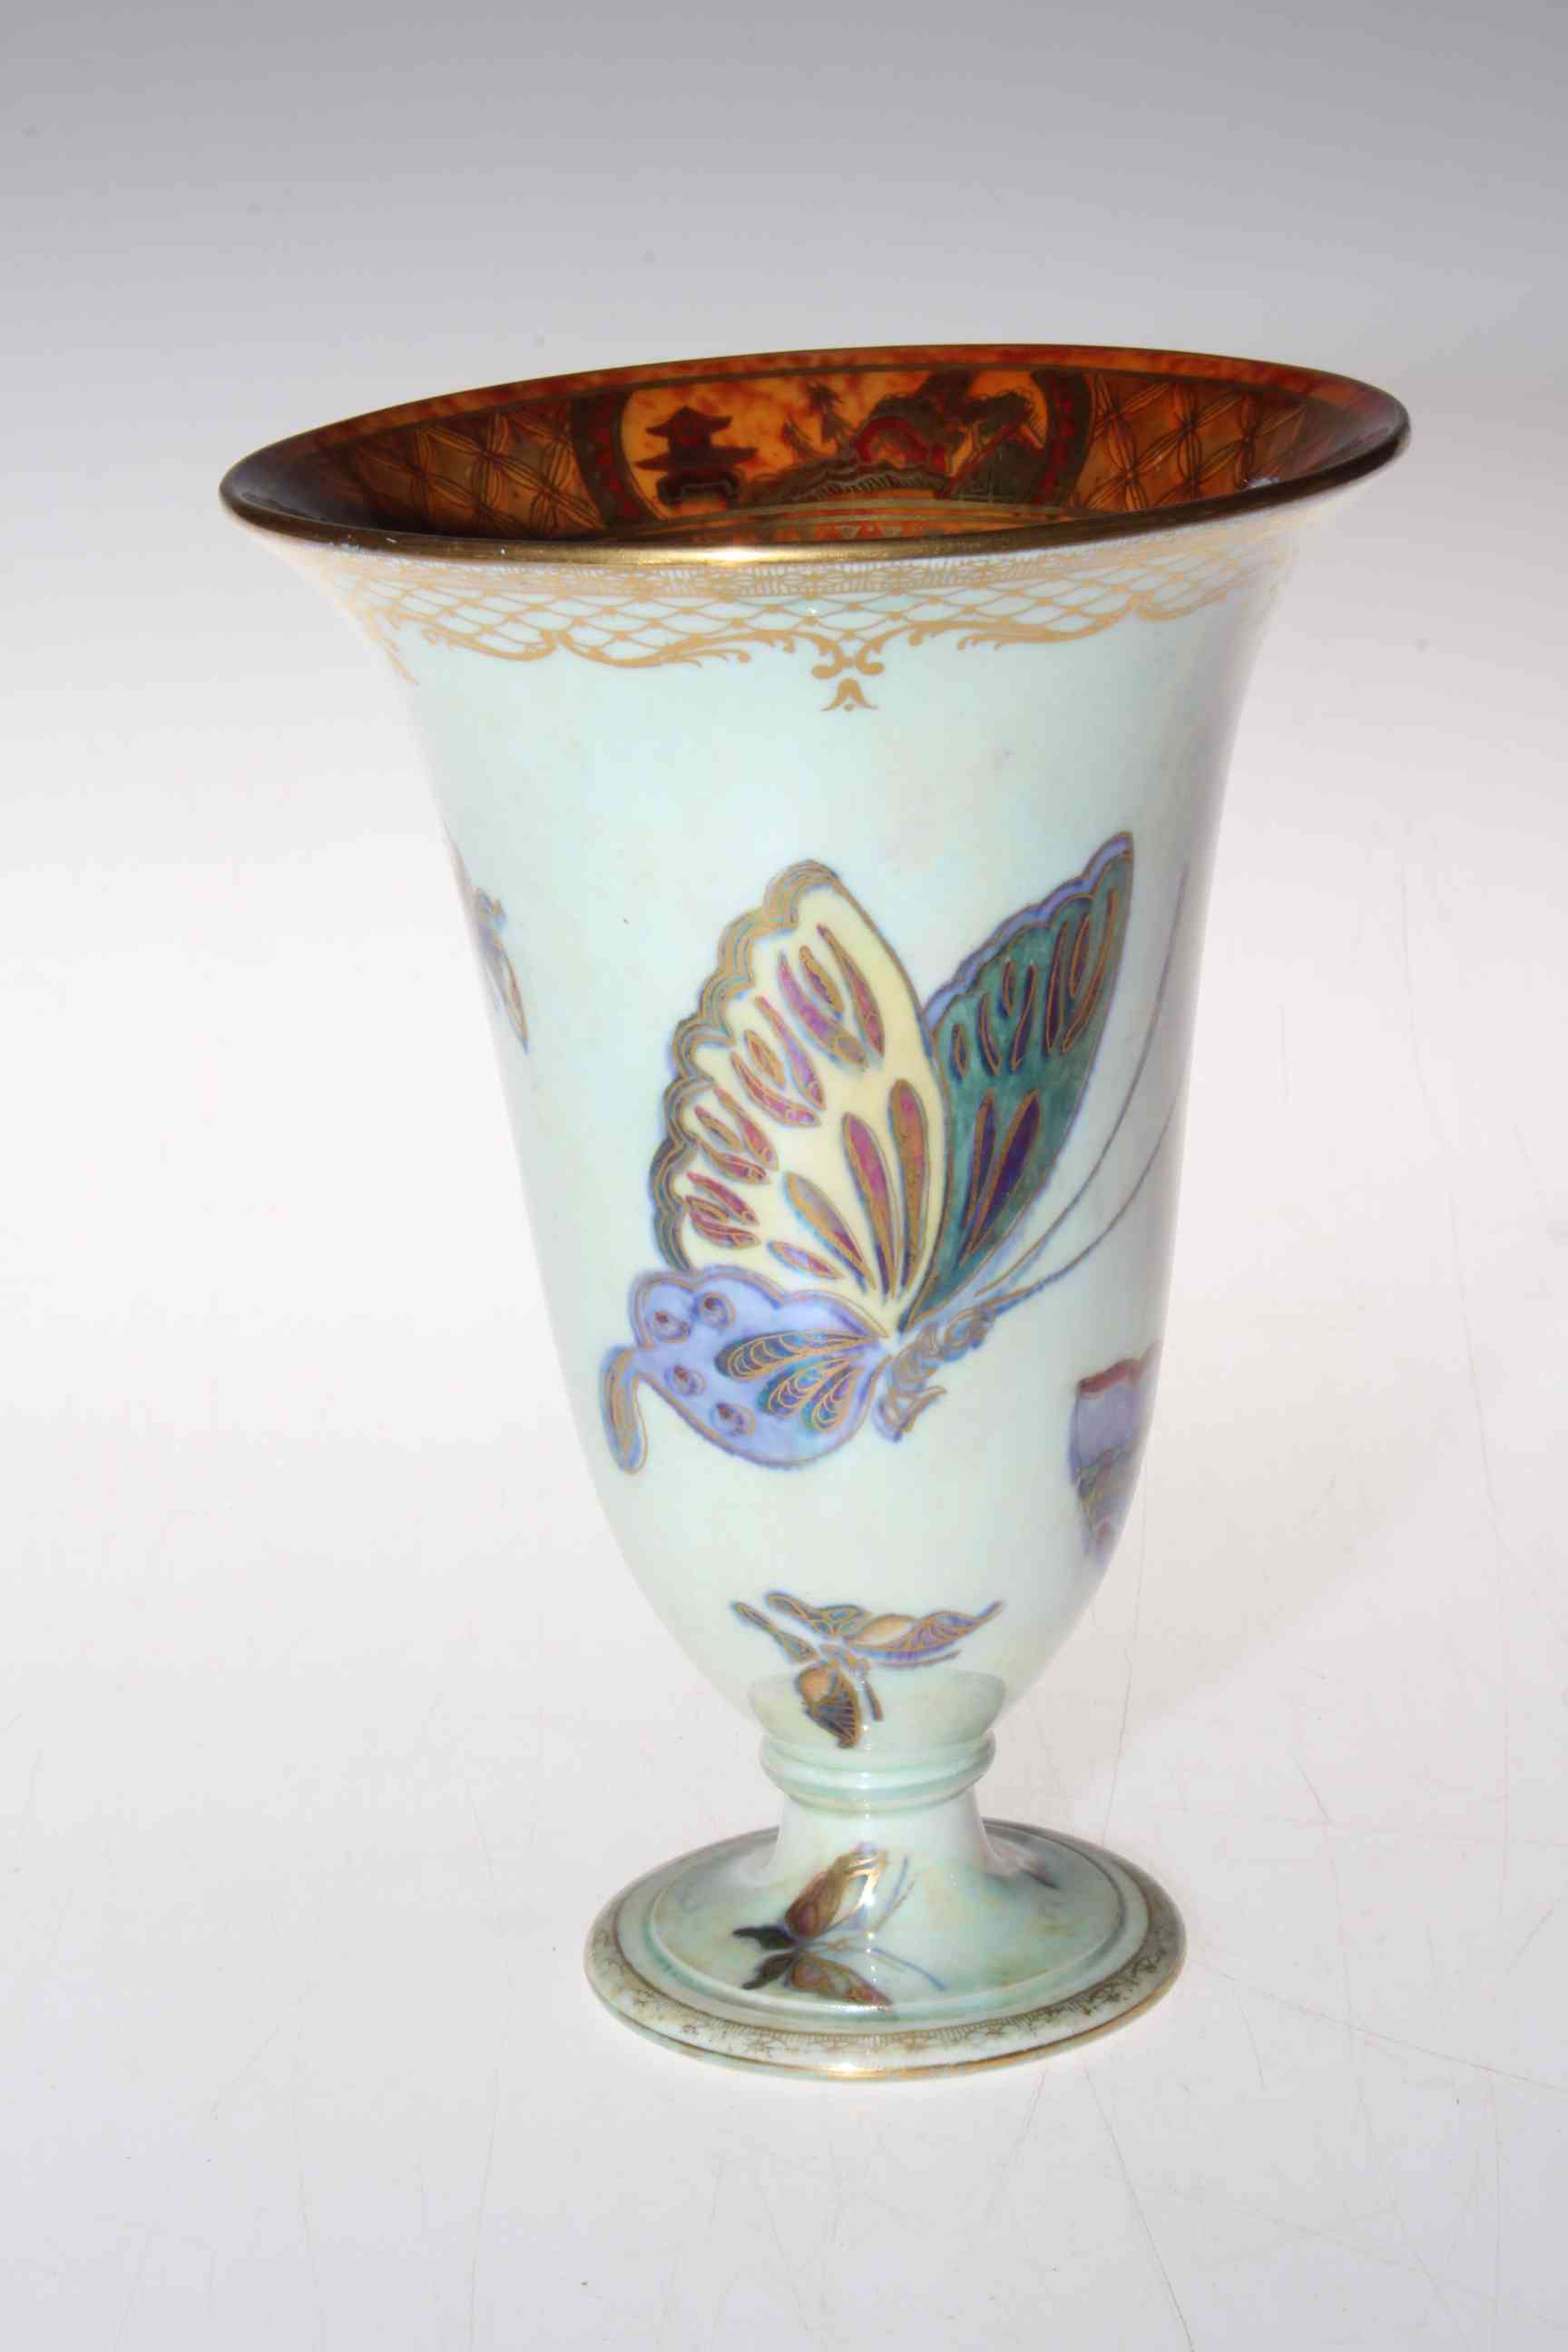 Wedgwood pedestal lustre vase decorated with butterflies, no. 4832, 18cm.